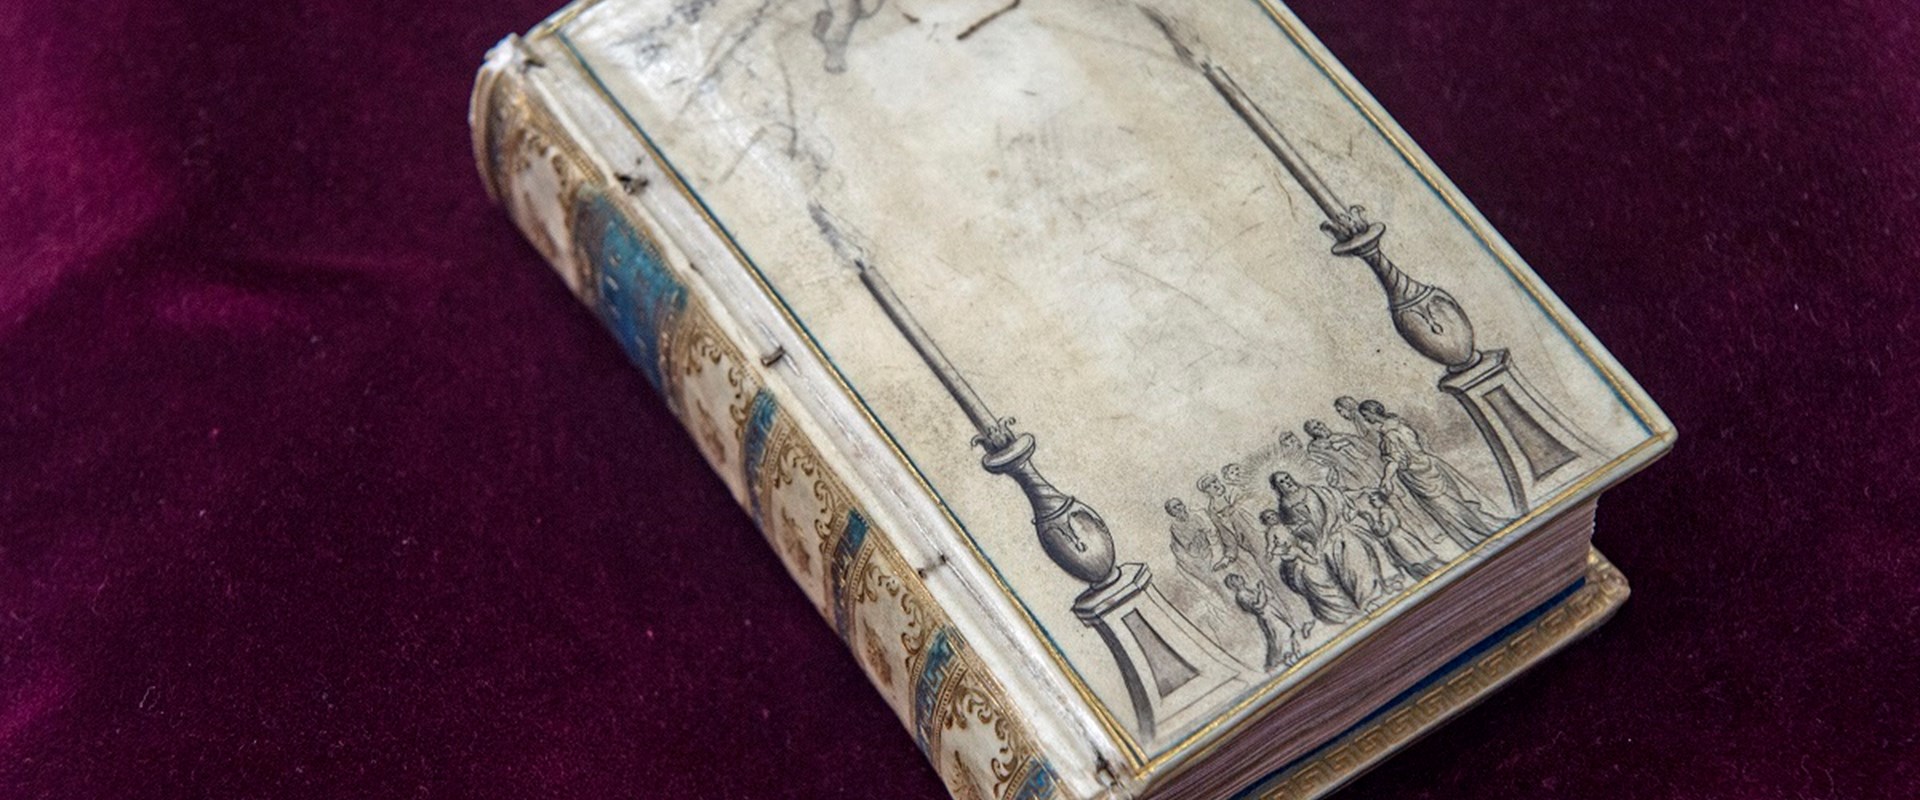 Very old book with a colourful spine on a velvety red surface. Faded off-white cover decorated with a cherub and group of people between two columns.